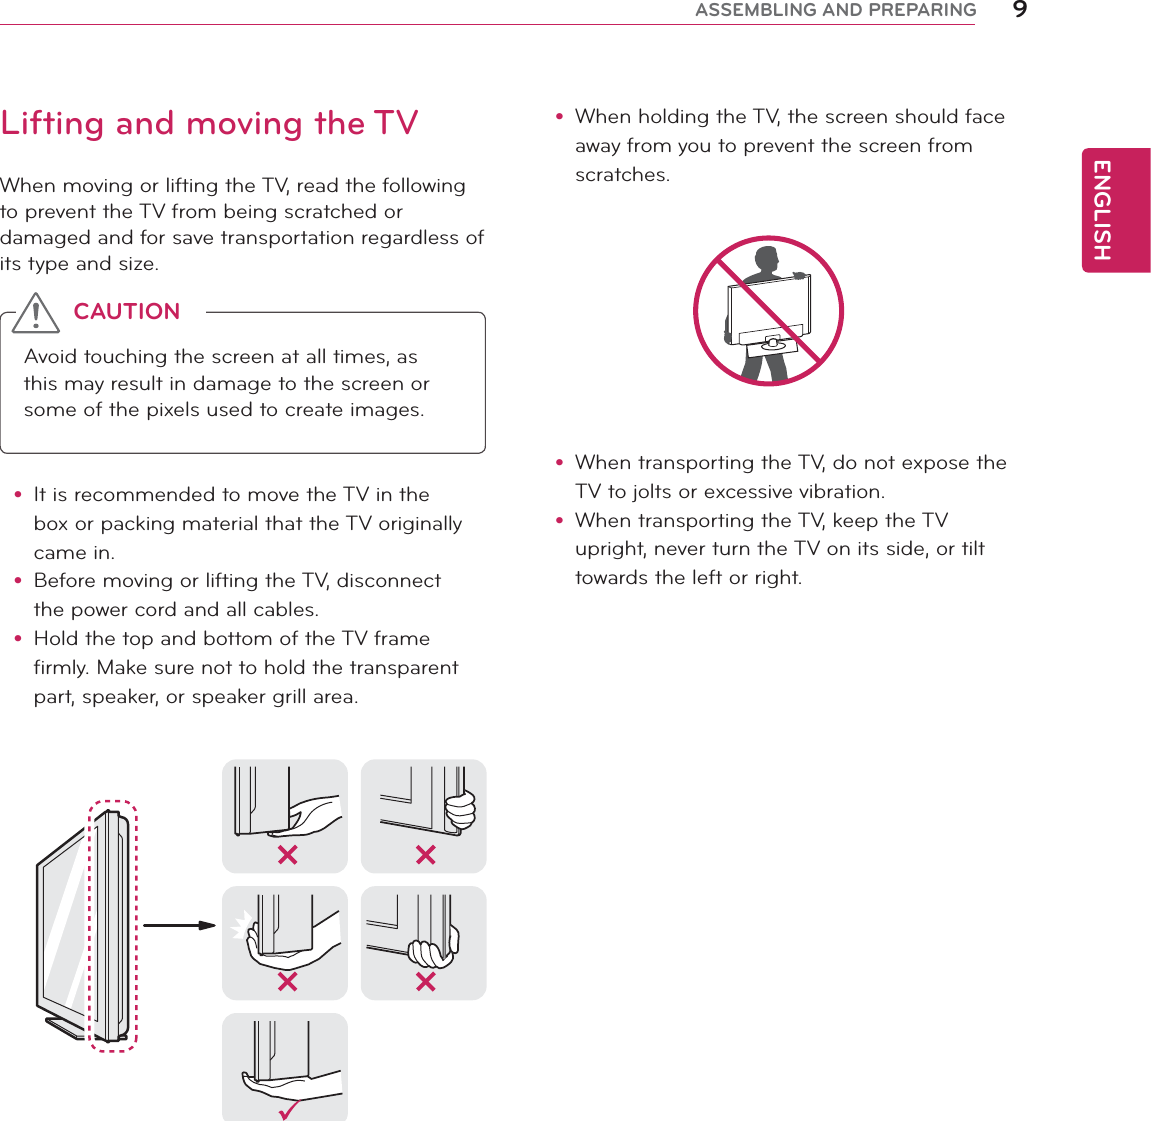 ENGLISH9ASSEMBLING AND PREPARINGy When holding the TV, the screen should face away from you to prevent the screen from scratches. y When transporting the TV, do not expose the TV to jolts or excessive vibration.y When transporting the TV, keep the TV upright, never turn the TV on its side, or tilt towards the left or right.Lifting and moving the TVWhen moving or lifting the TV, read the following to prevent the TV from being scratched or damaged and for save transportation regardless of its type and size.Avoid touching the screen at all times, as this may result in damage to the screen or some of the pixels used to create images.CAUTIONy It is recommended to move the TV in the box or packing material that the TV originally came in.y Before moving or lifting the TV, disconnect the power cord and all cables.y Hold the top and bottom of the TV frame firmly. Make sure not to hold the transparent part, speaker, or speaker grill area.